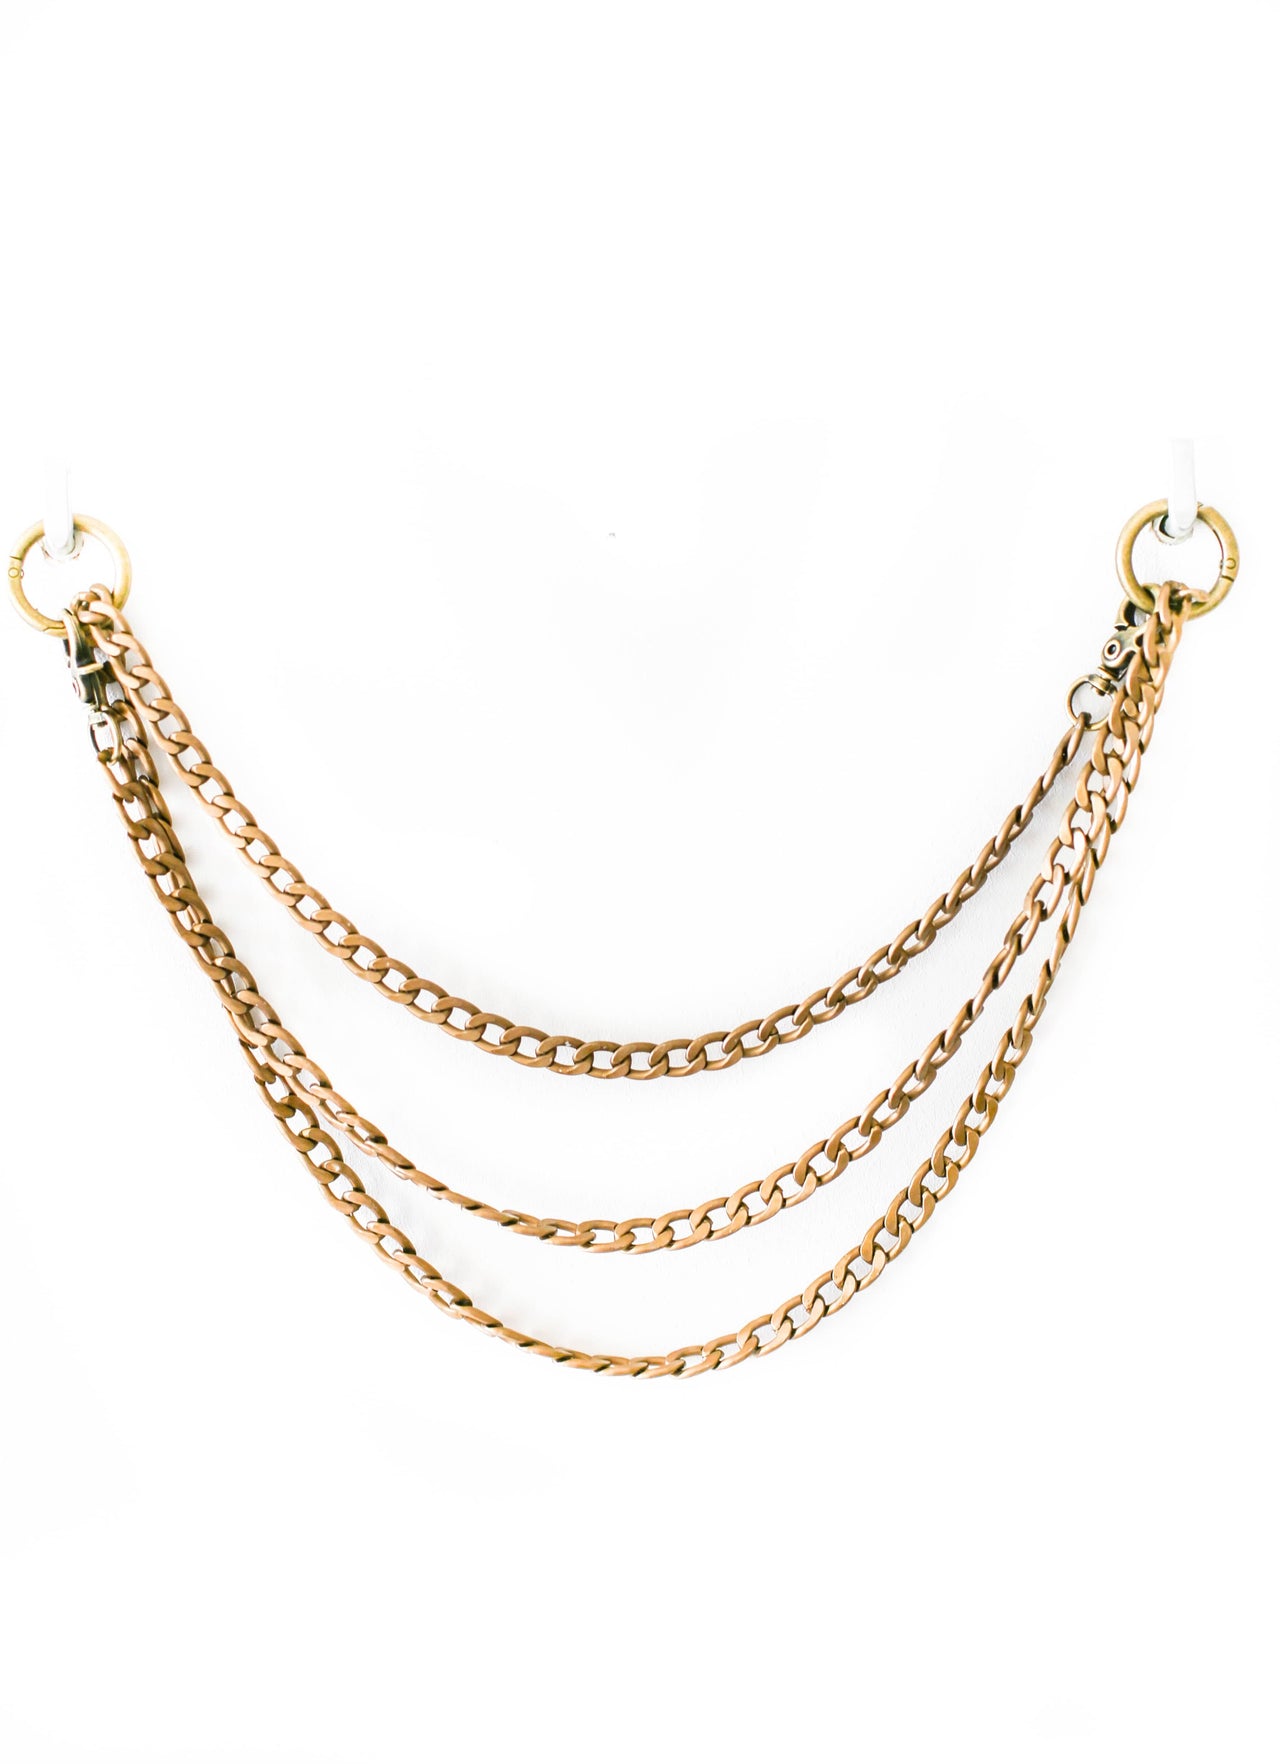 Antique Brass Chain For Bags